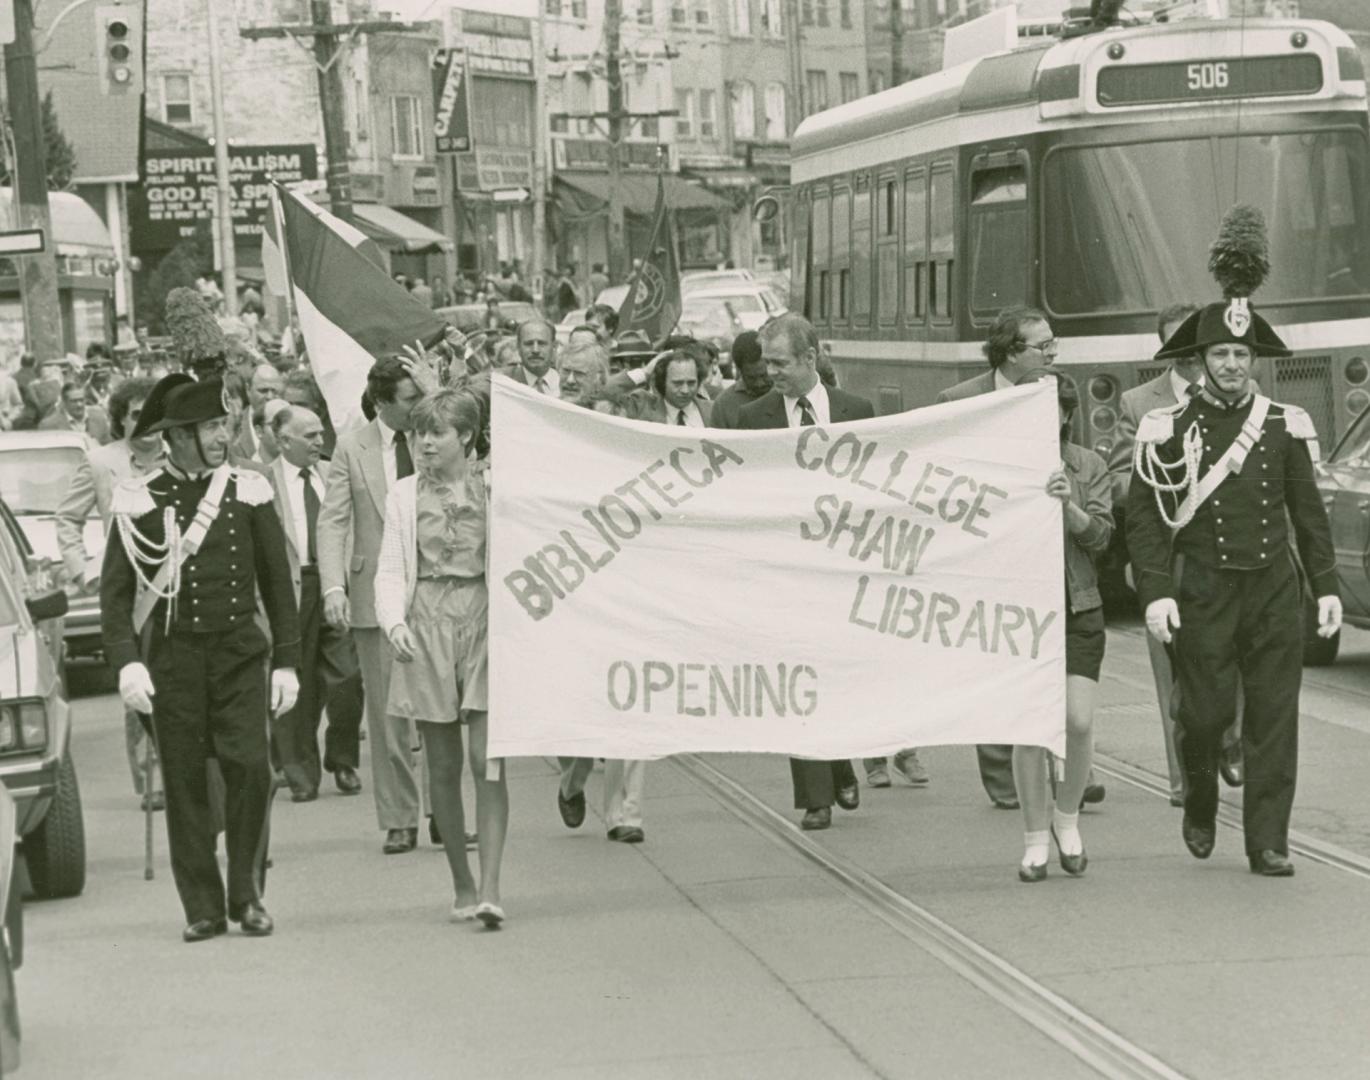 A group of people carrying banners and flags parade along a city street with a streetcar in the ...